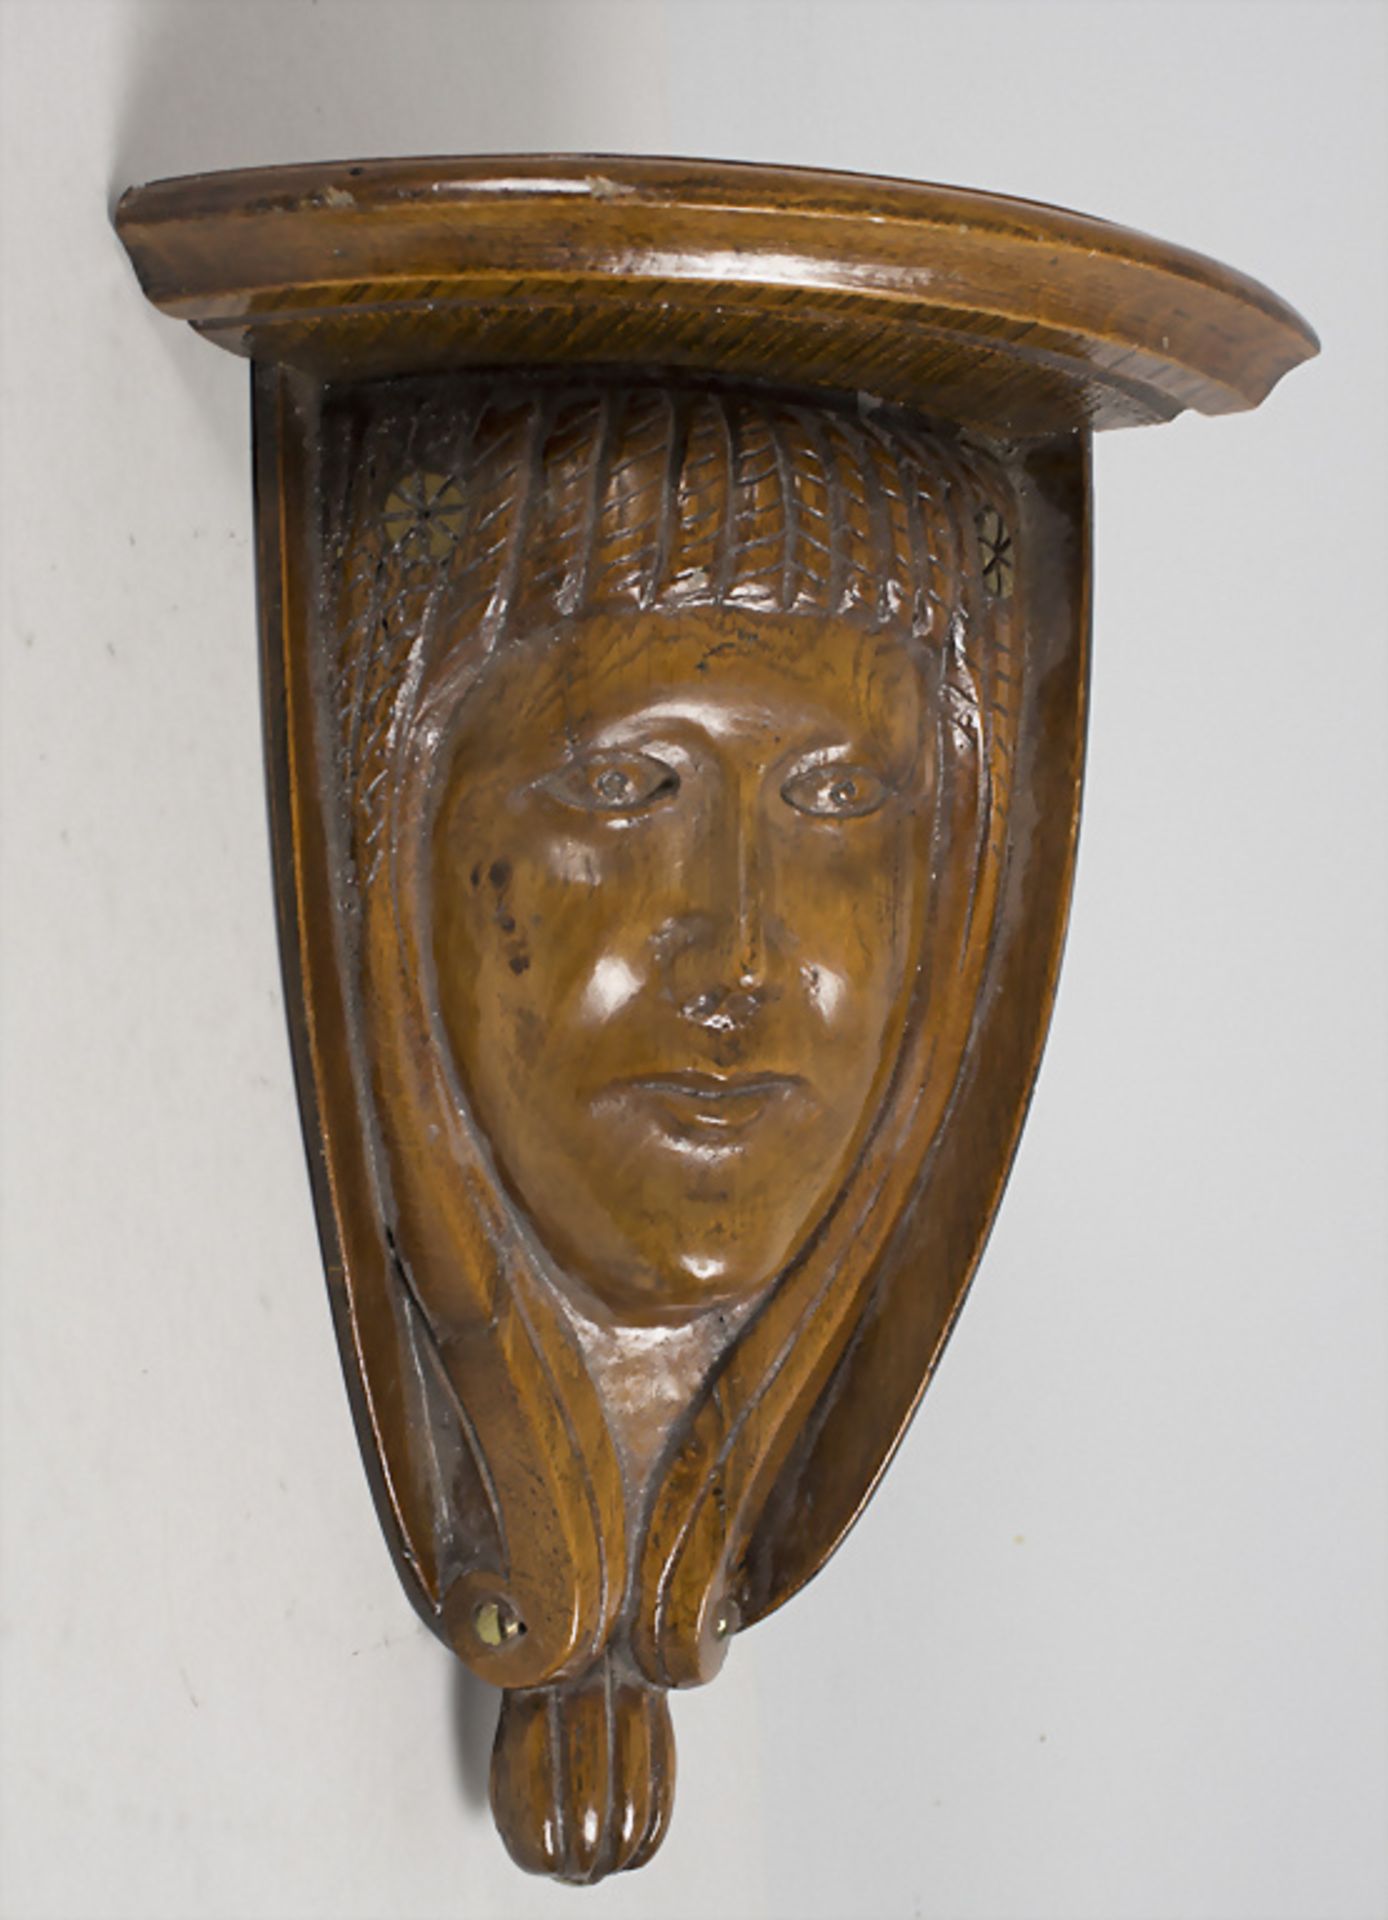 Eckkonsole mit Frauenkopf / A wooden console with the head of a young woman, 1970